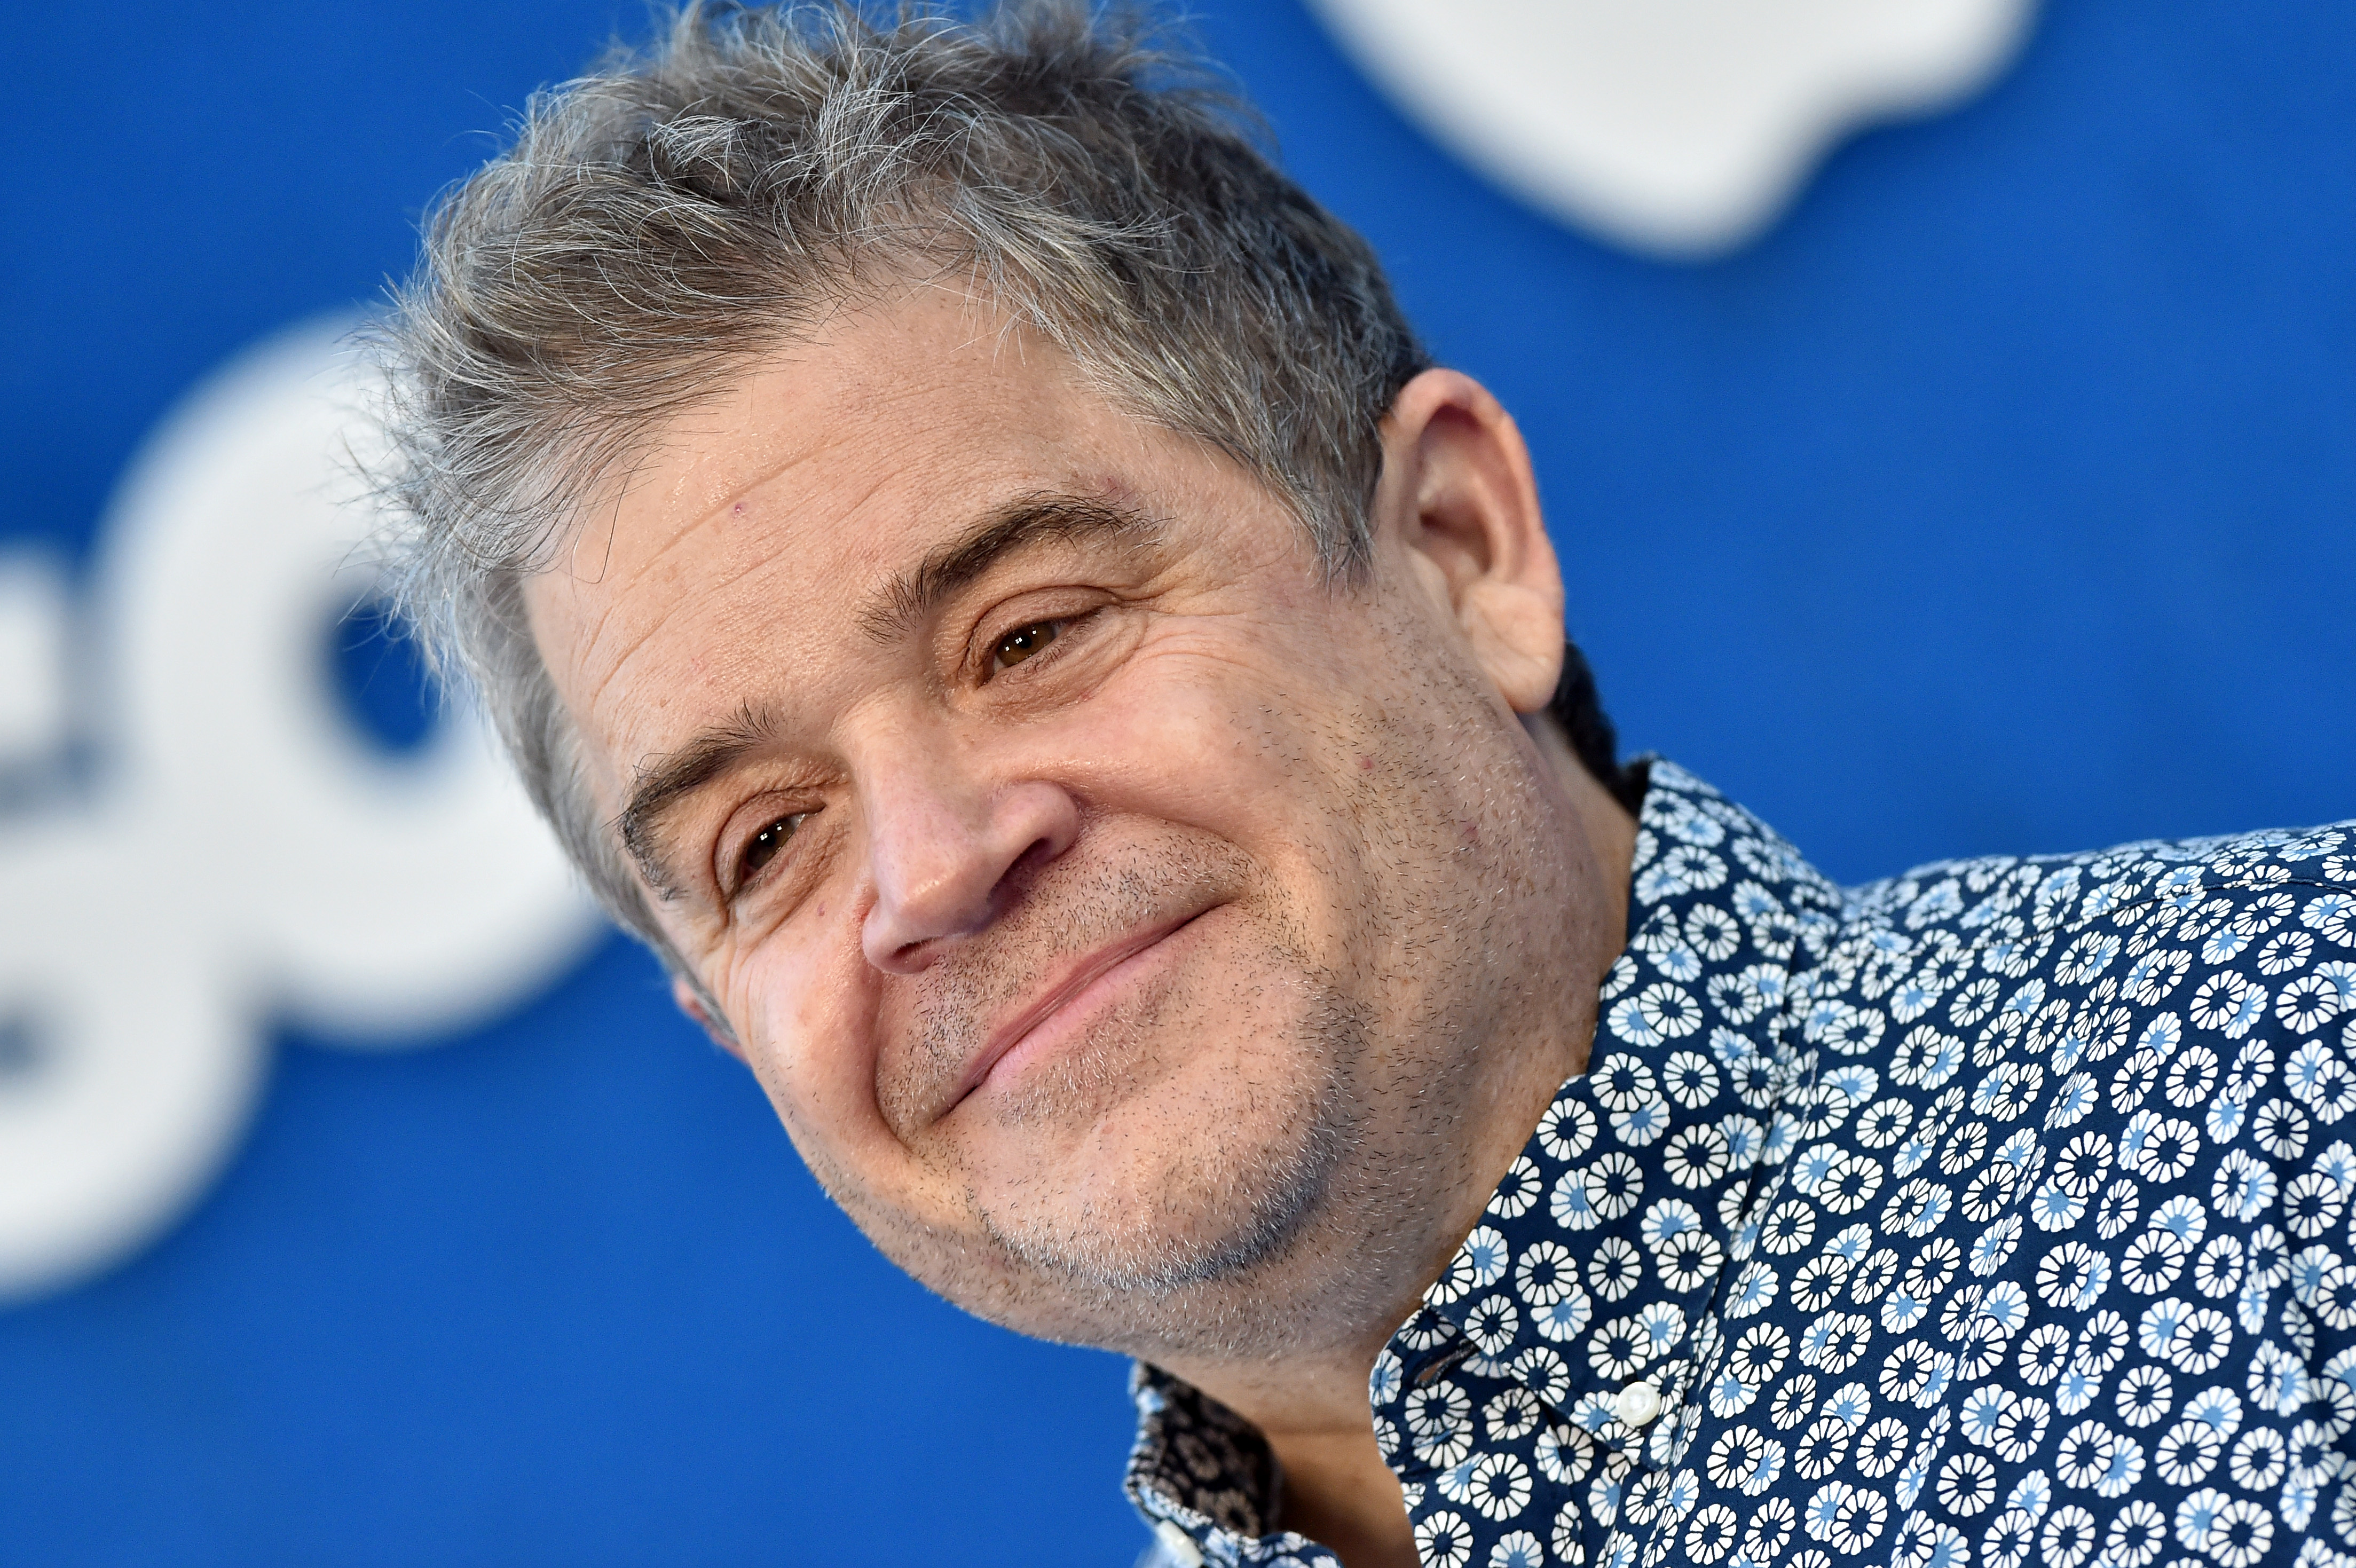 Patton Oswalt attends Apple's "Ted Lasso" Season 2 Premiere at Pacific Design Center on July 15, 2021 in West Hollywood, California.